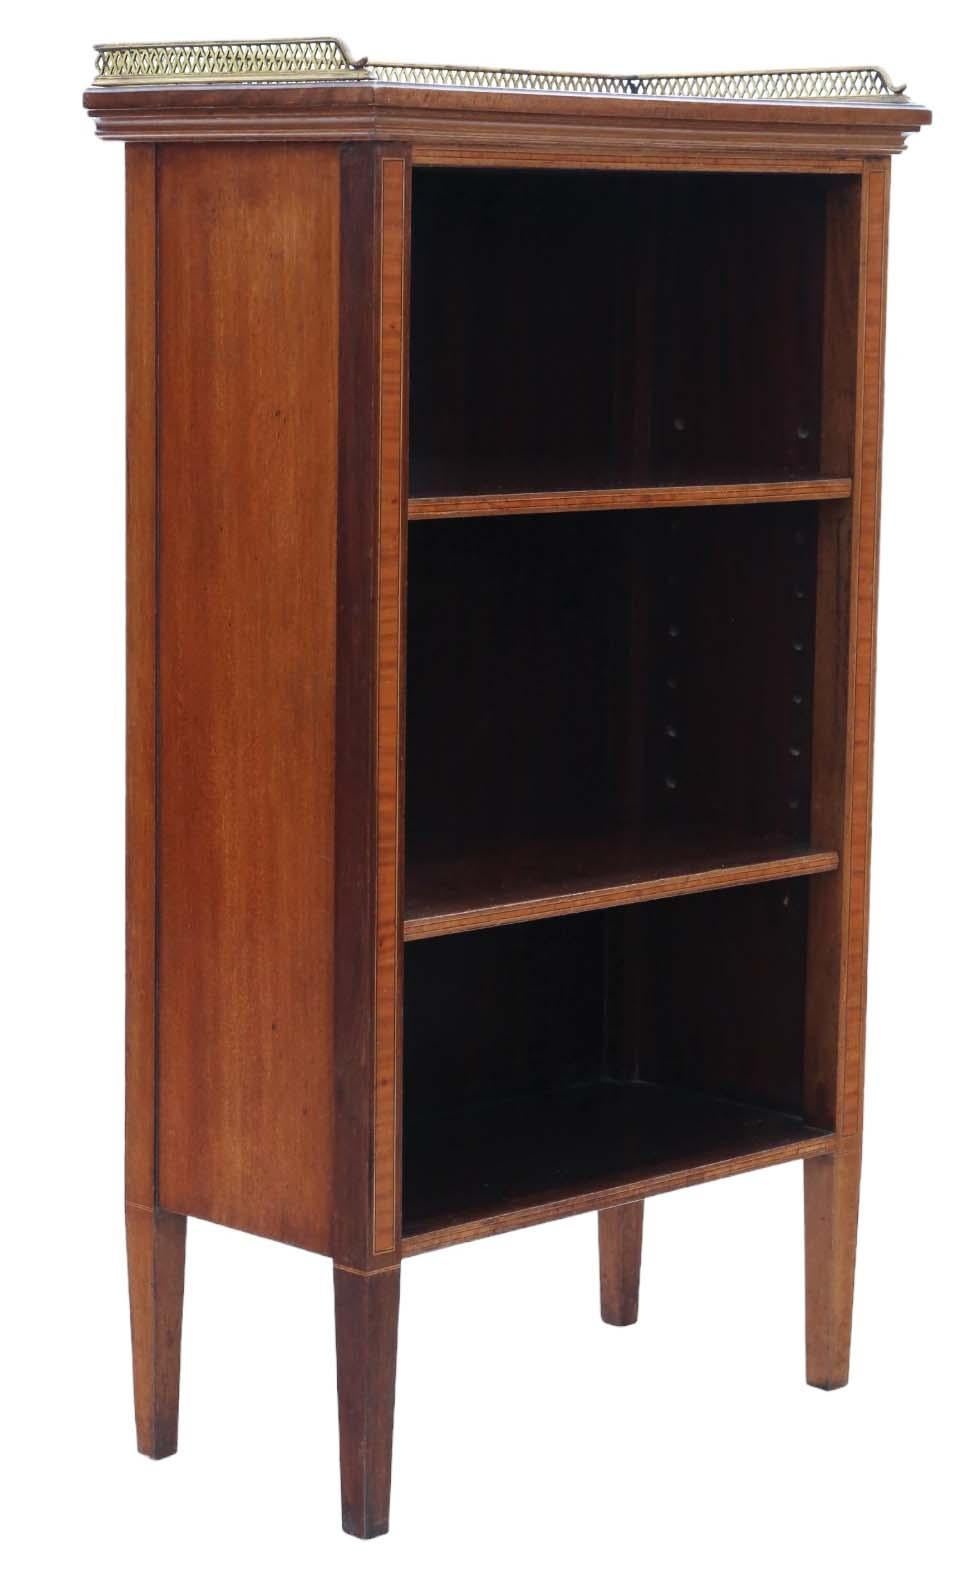 Wood Antique C1900 Inlaid Mahogany Adjustable Bookcase Display Cabinet - Fine Quality For Sale